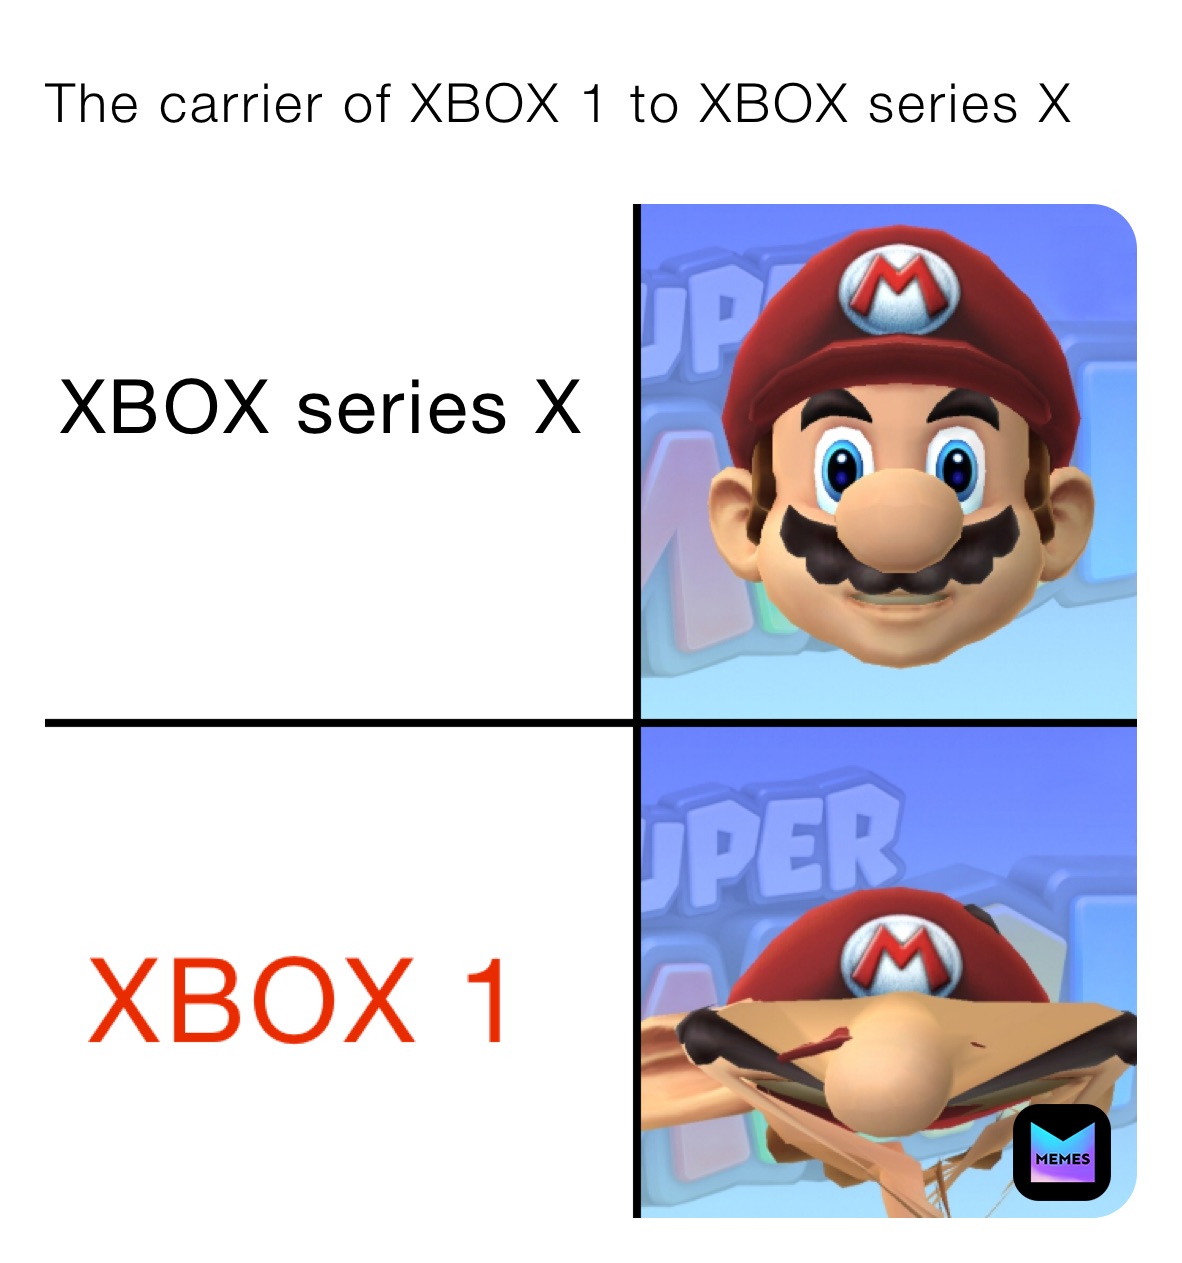 The carrier of XBOX 1 to XBOX series X